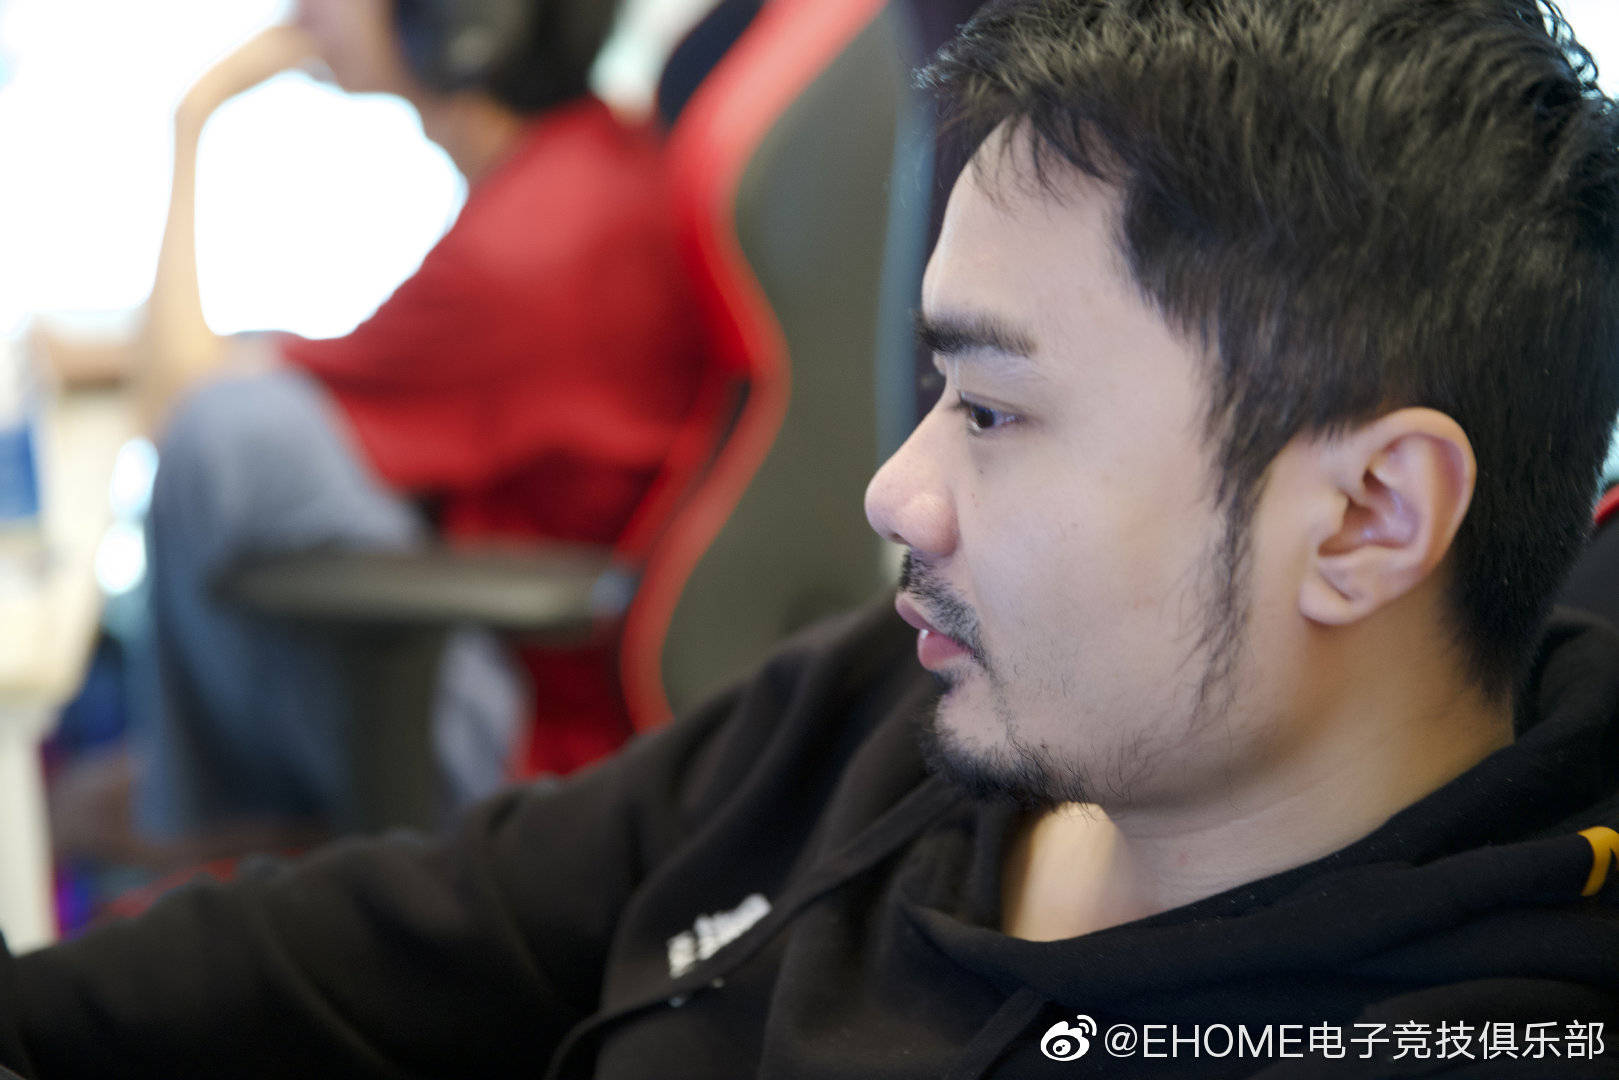 PSG.LGD and EHOME Shuffle Rosters  Hotspawn.com